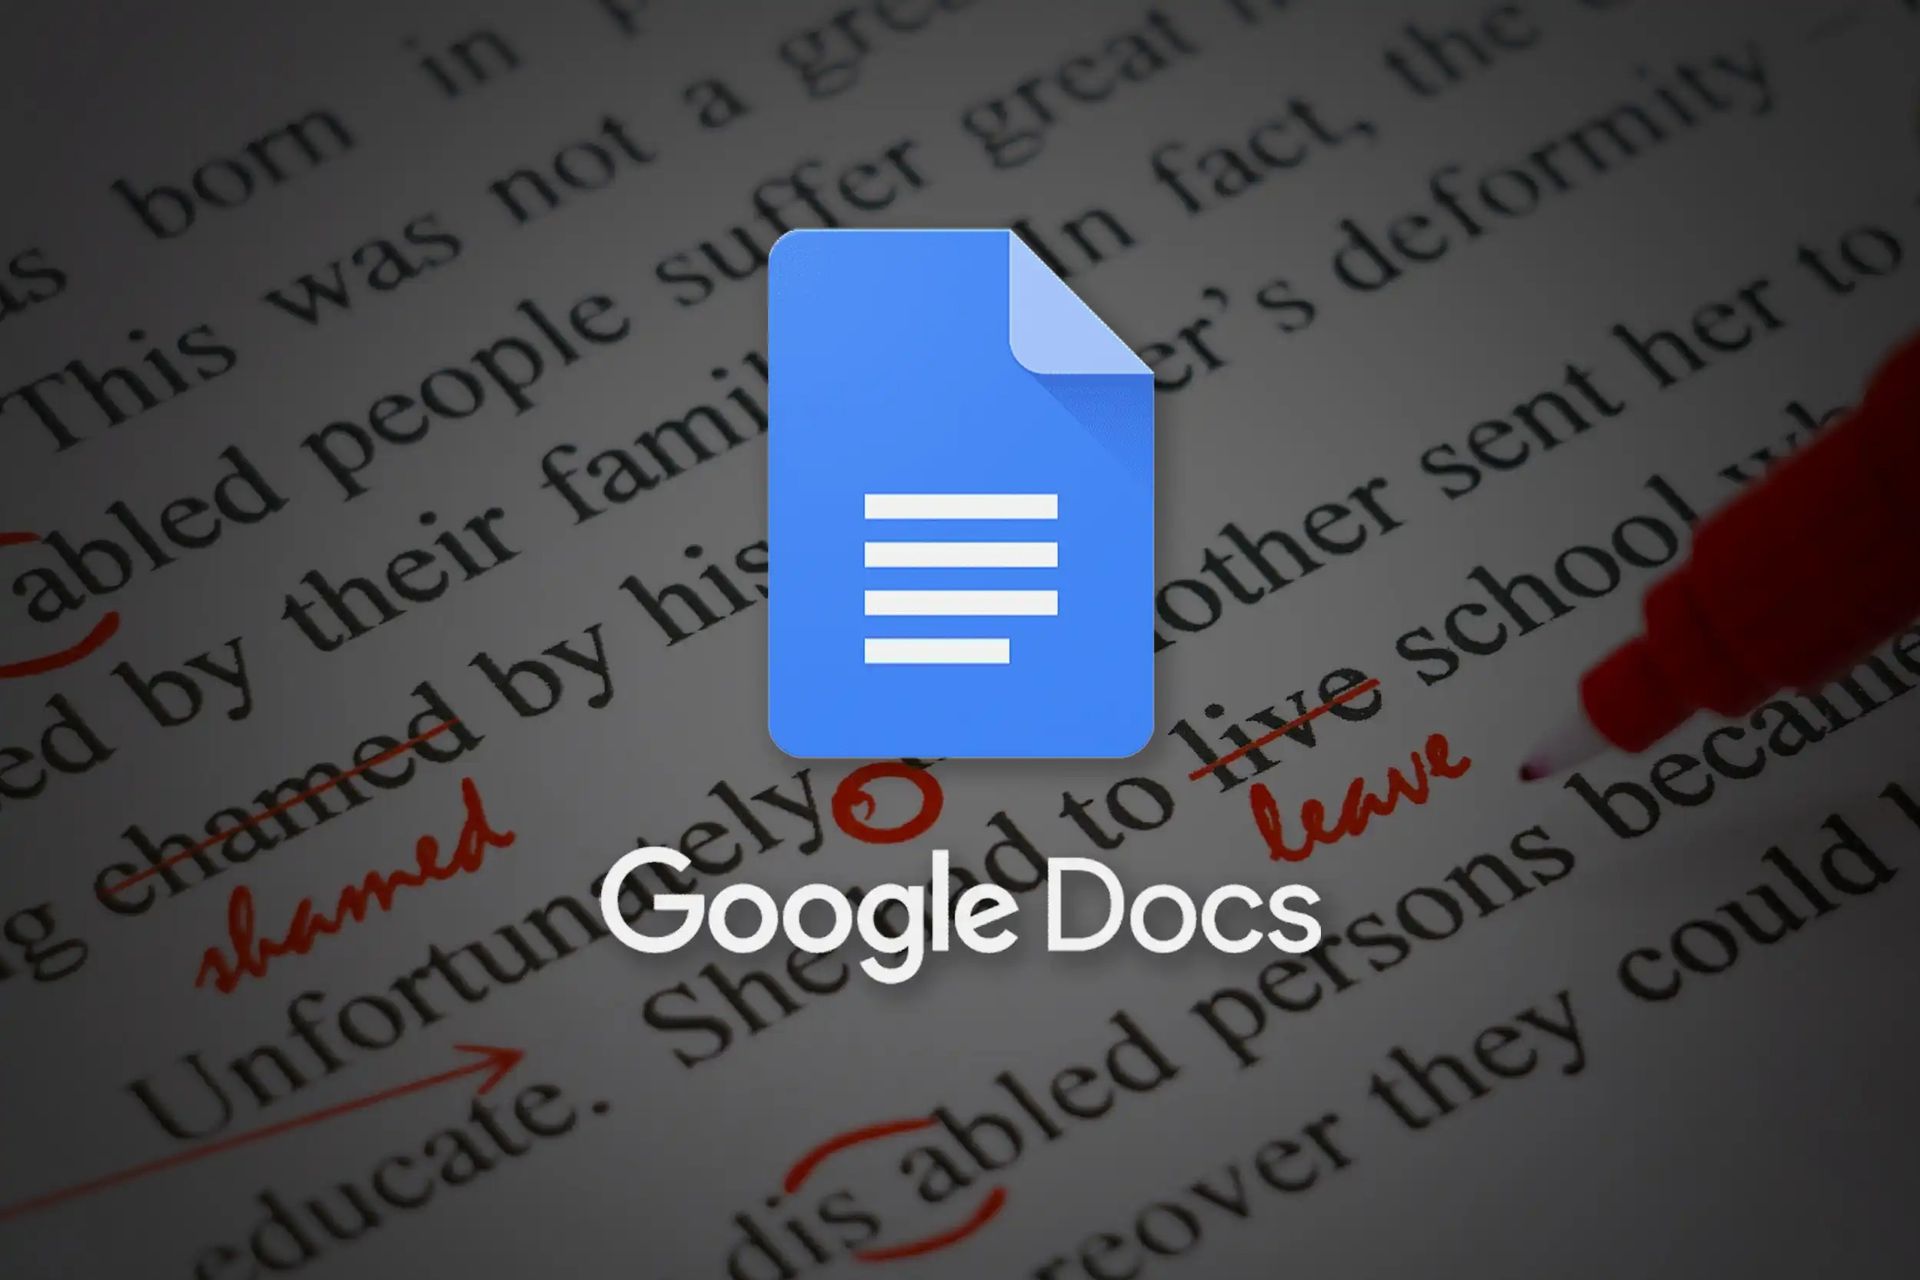 How to double space in Google Docs?